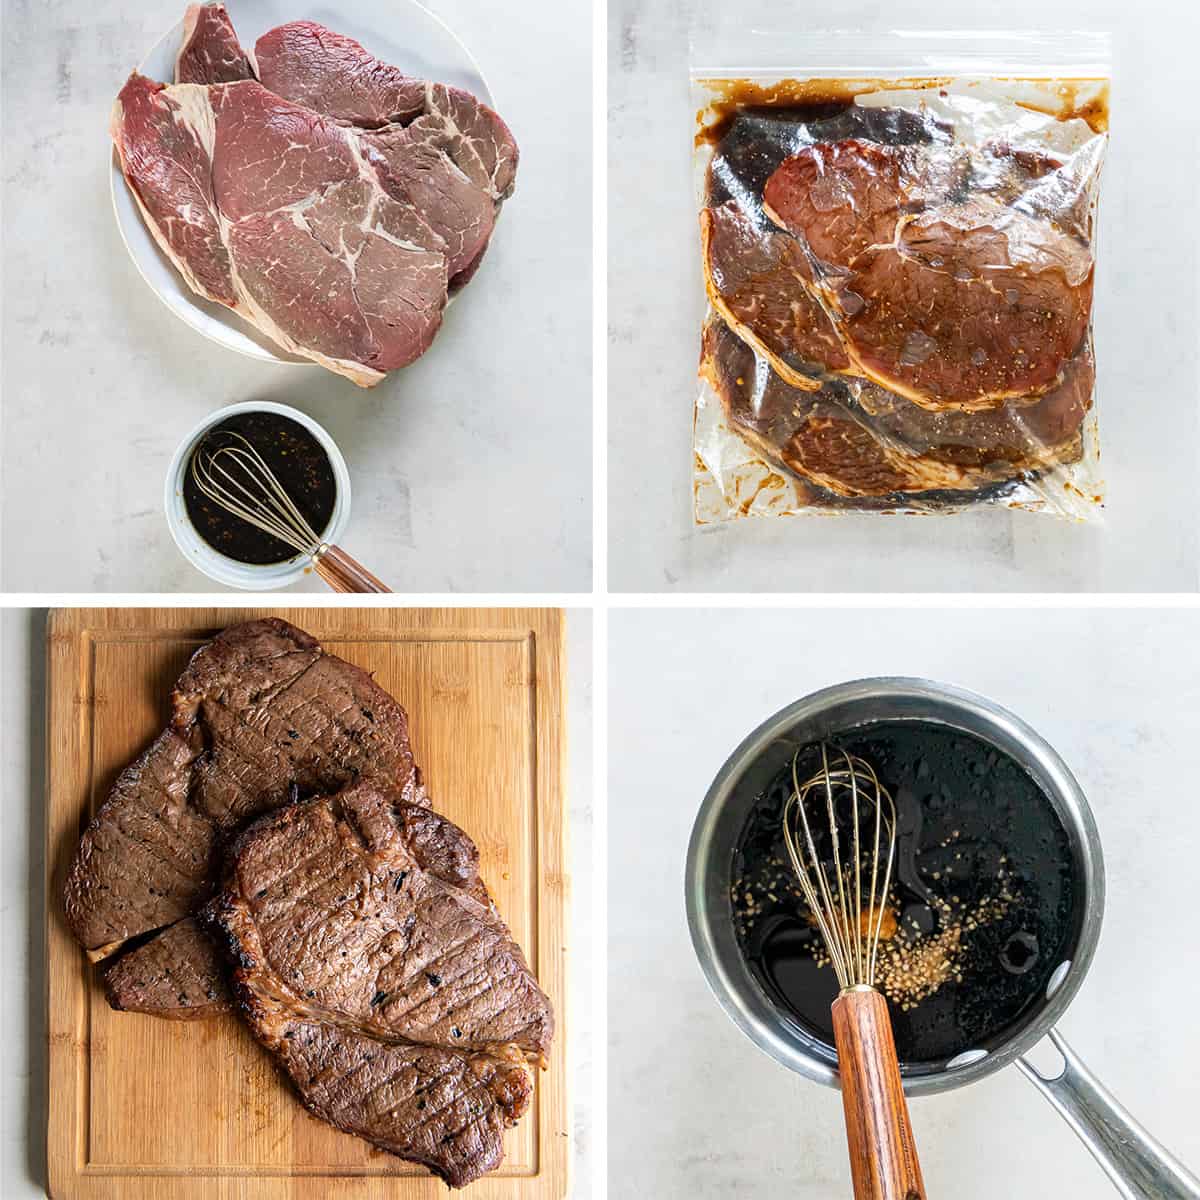 Four images showing steak in a bag with marinade, grilled steak on a board, and teriyaki sauce in a saucepan.